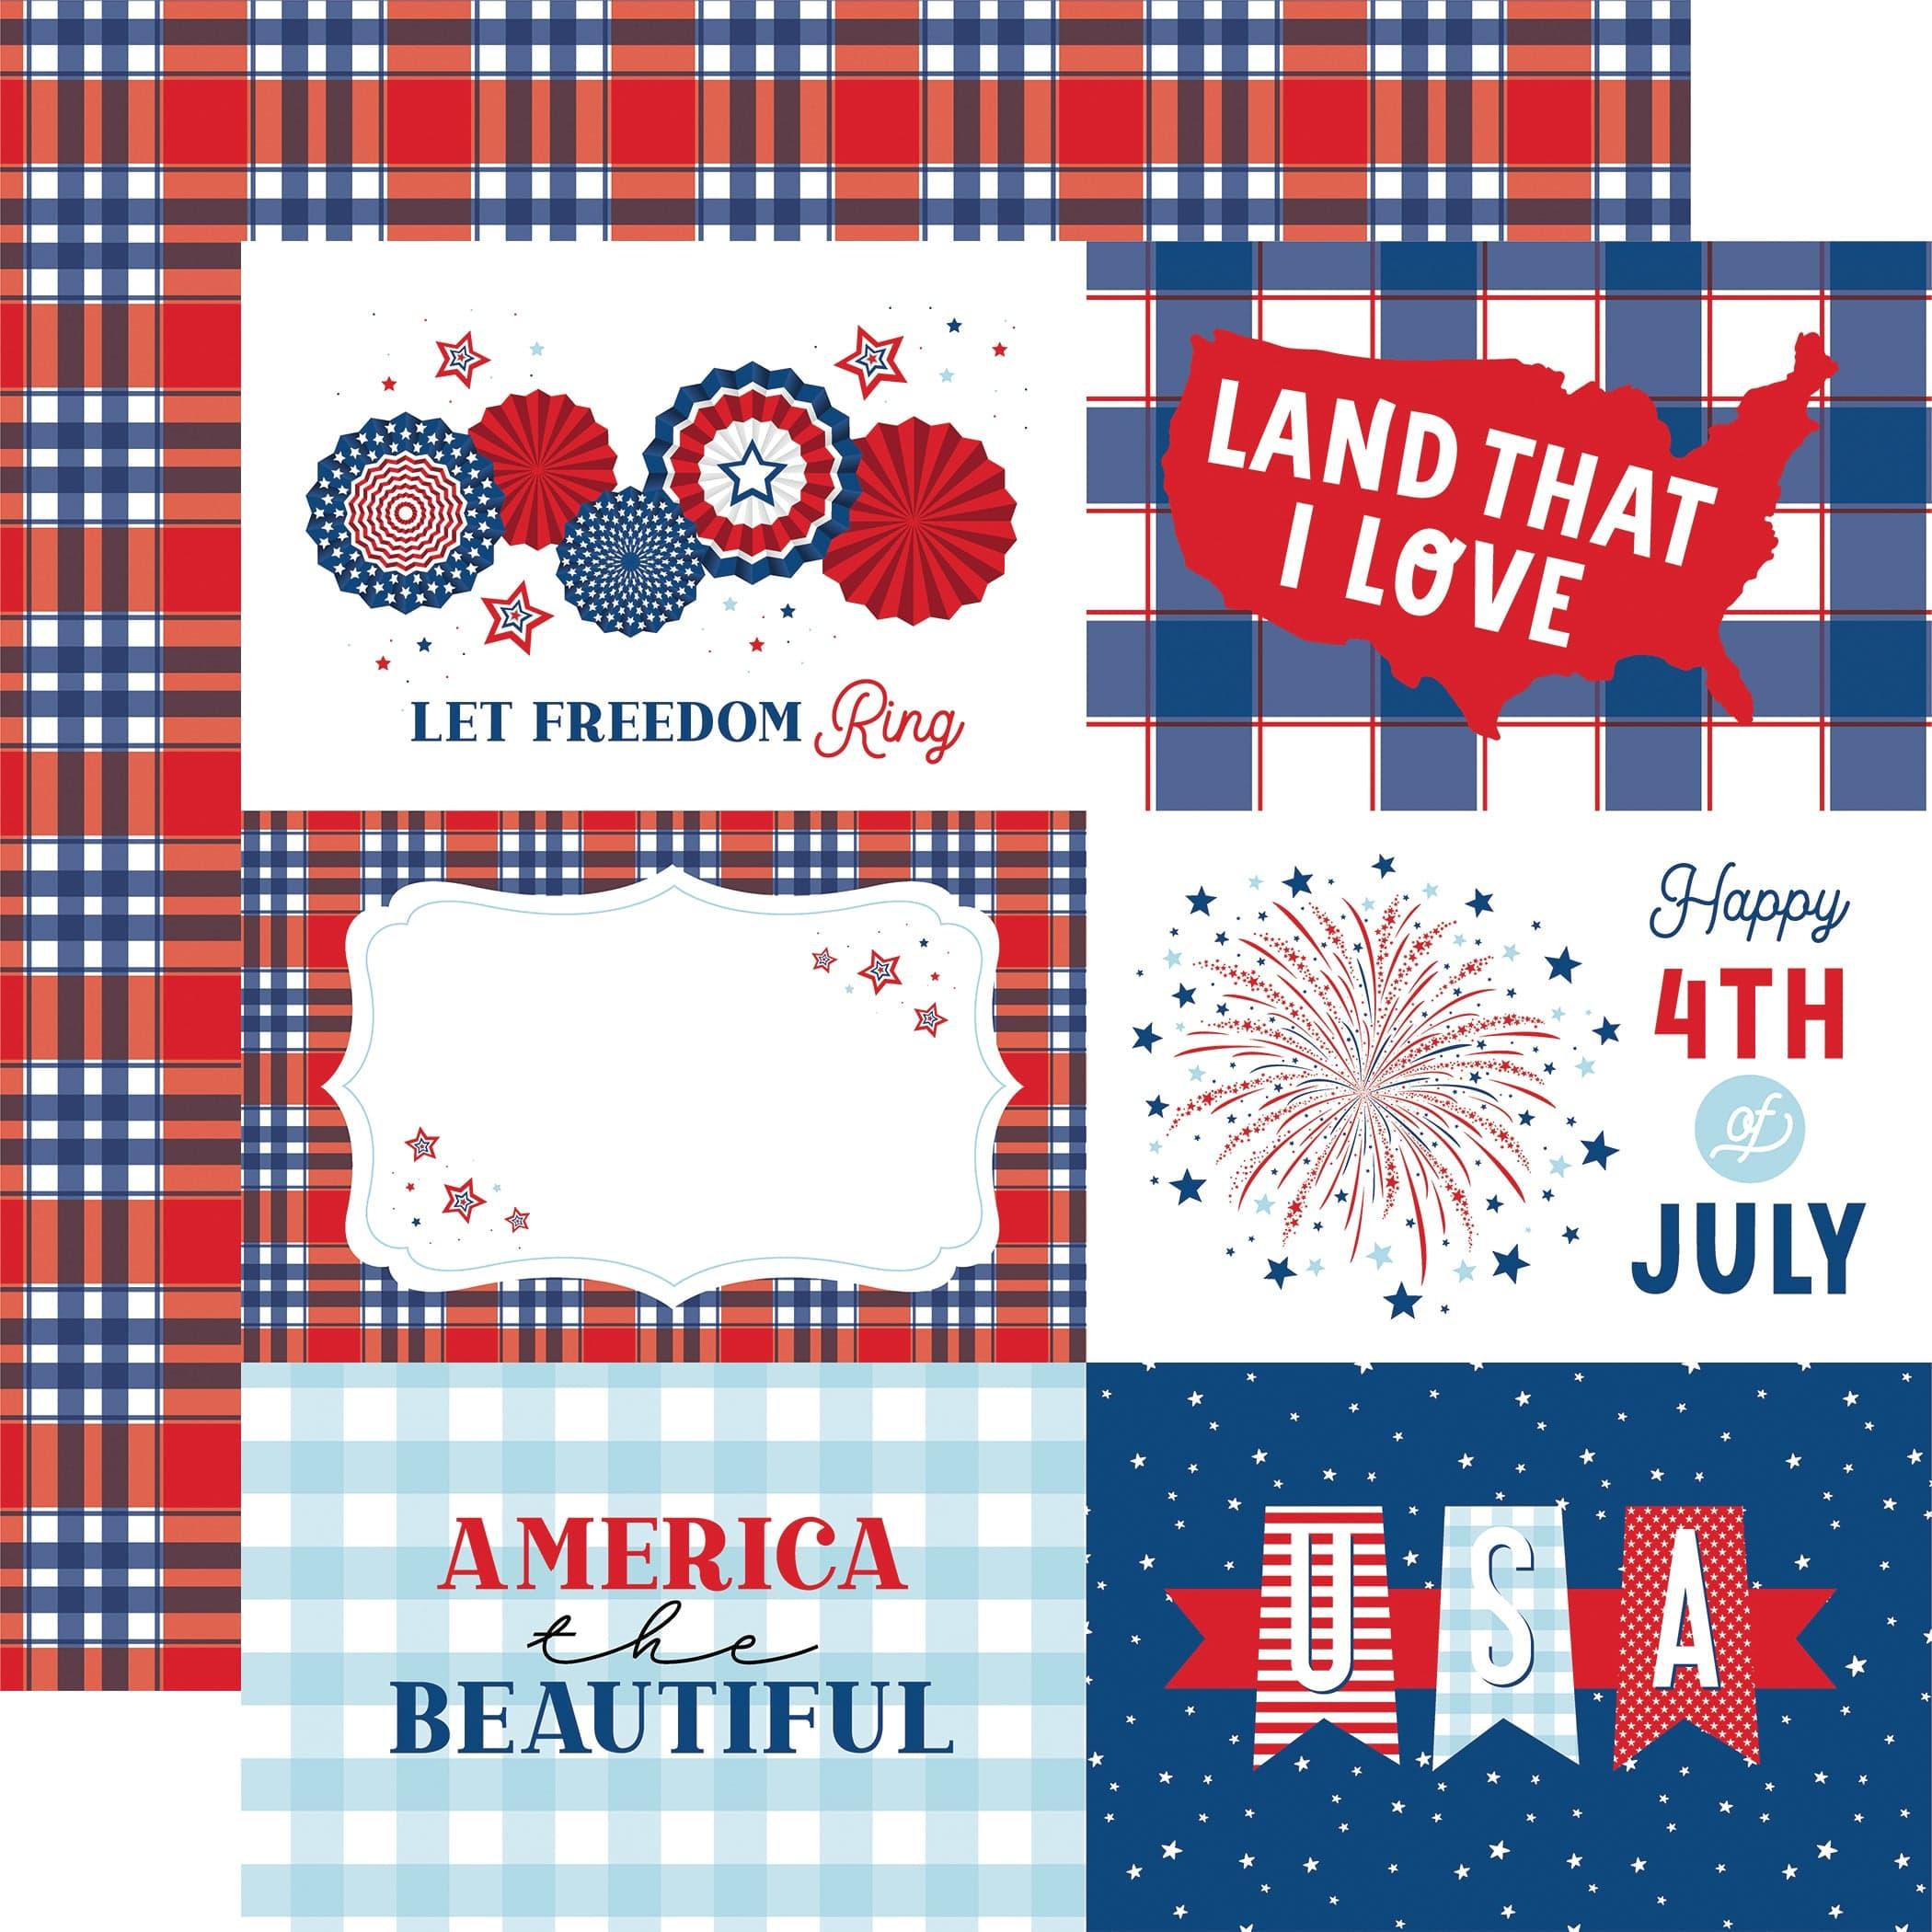 Let Freedom Ring Collection 12 x 12 Double-Sided Scrapbook Paper Kit & Sticker Sheet by Echo Park Paper - 13 Pieces - Scrapbook Supply Companies